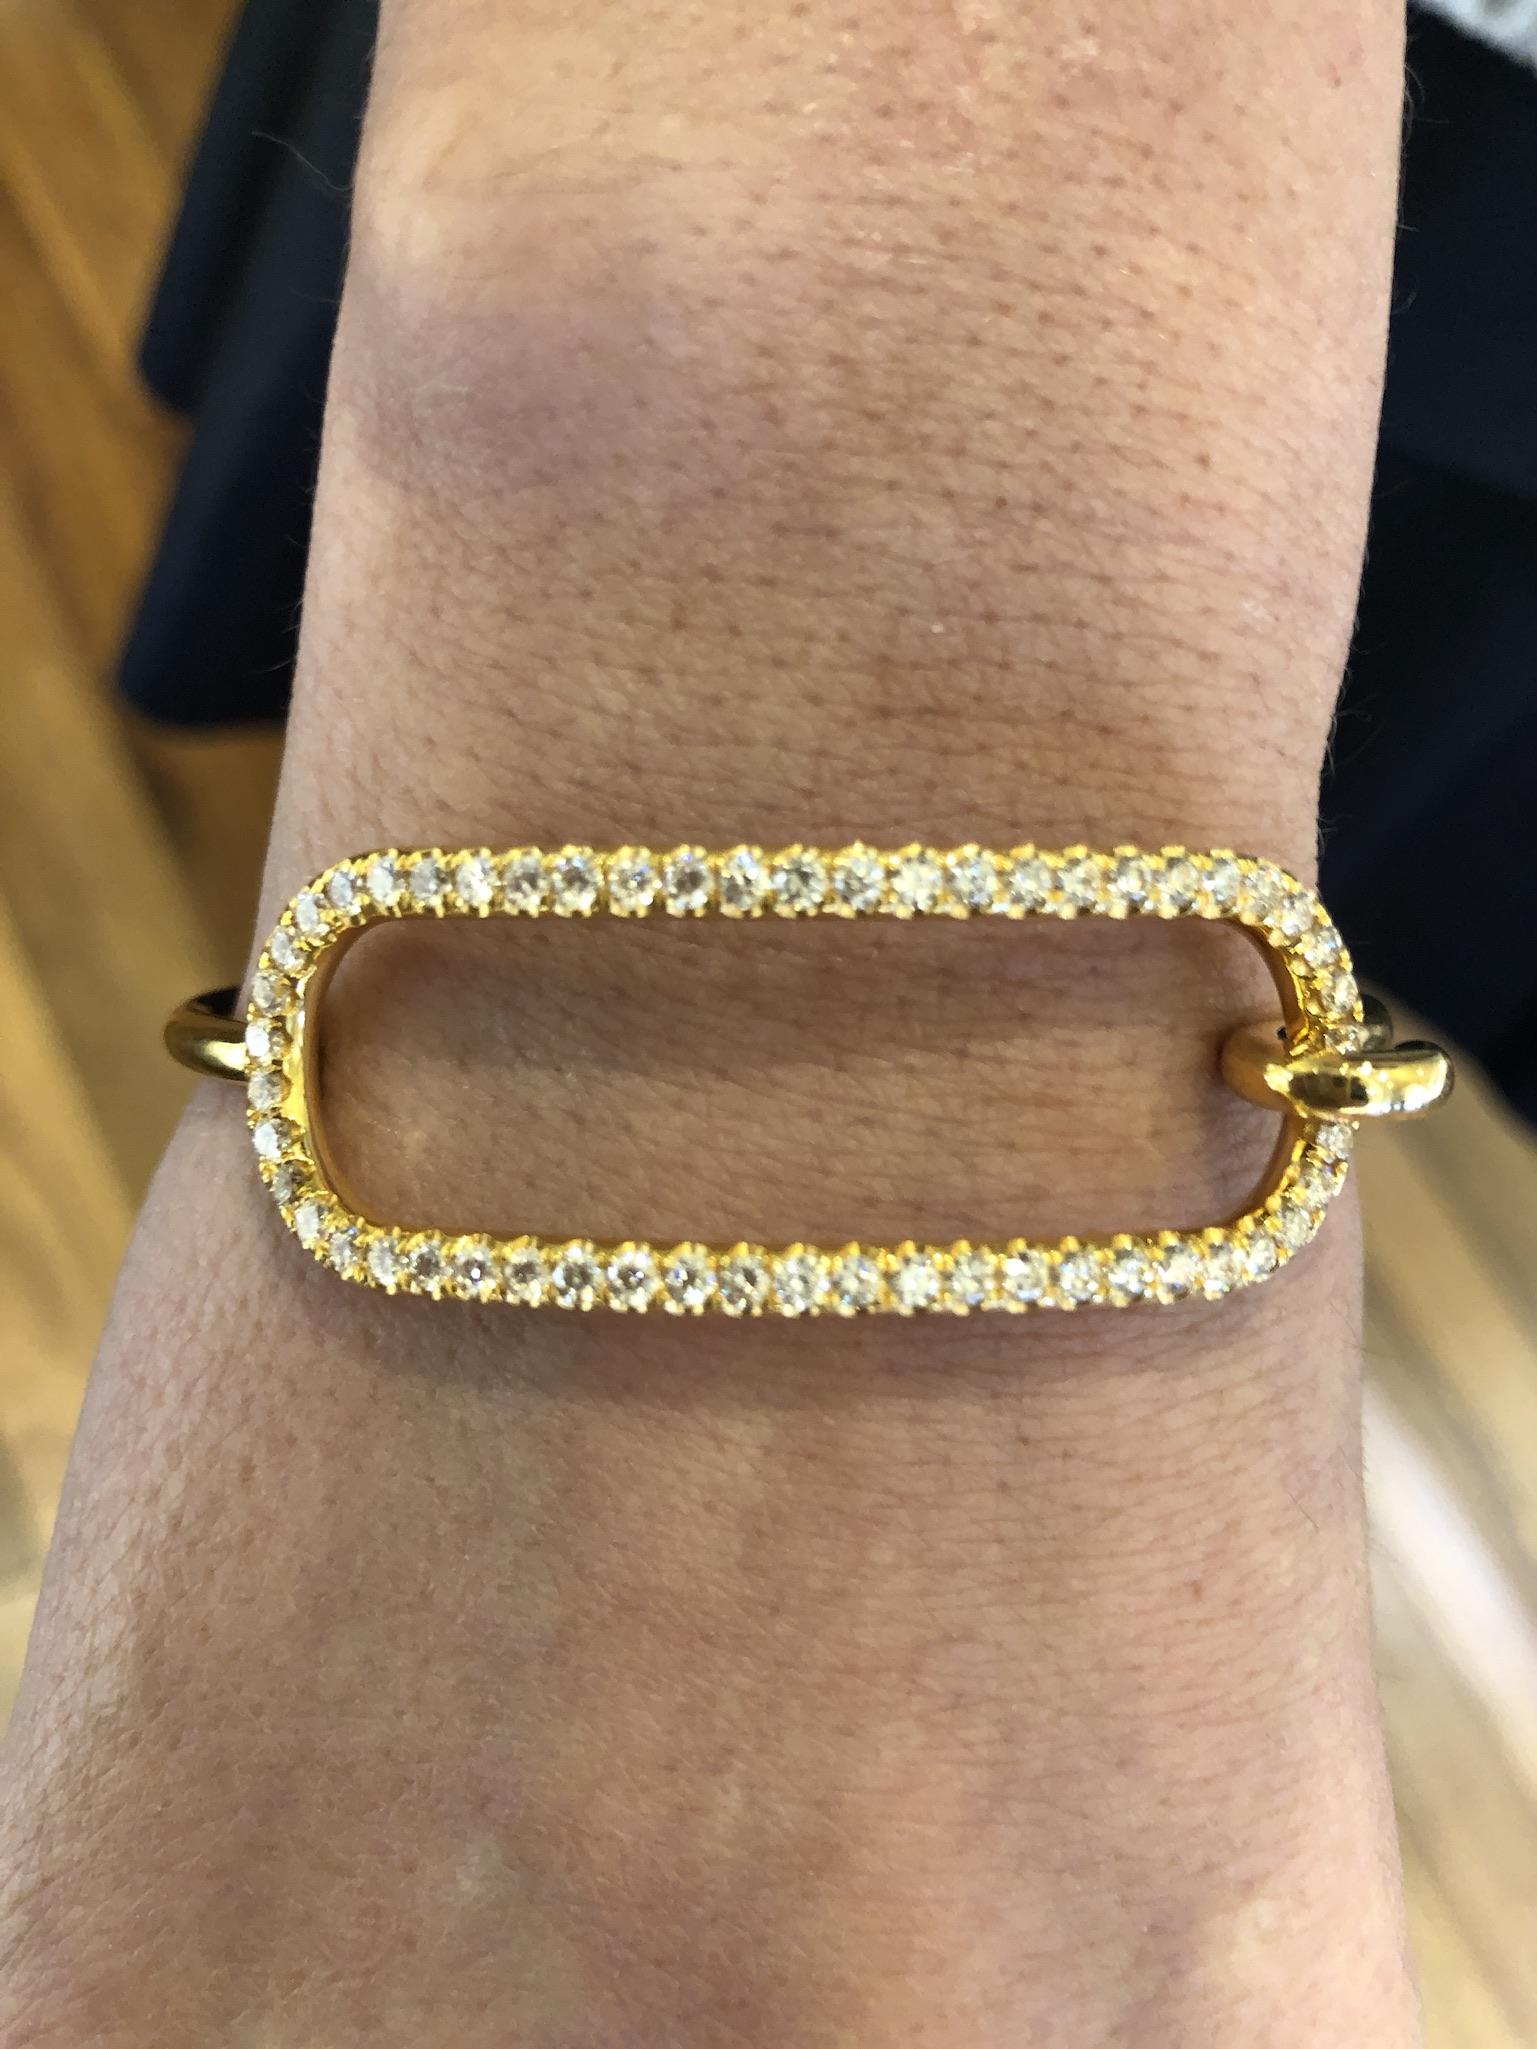 Andrew Glassford's signature 3mm Diamond Tension Bracelet in 18K yellow gold. 1.93 carats of round brilliant GH VSI Diamonds that creates a stunning effect on the wrist. The entire bracelet is 3mm around. The tension series is based off the 18k